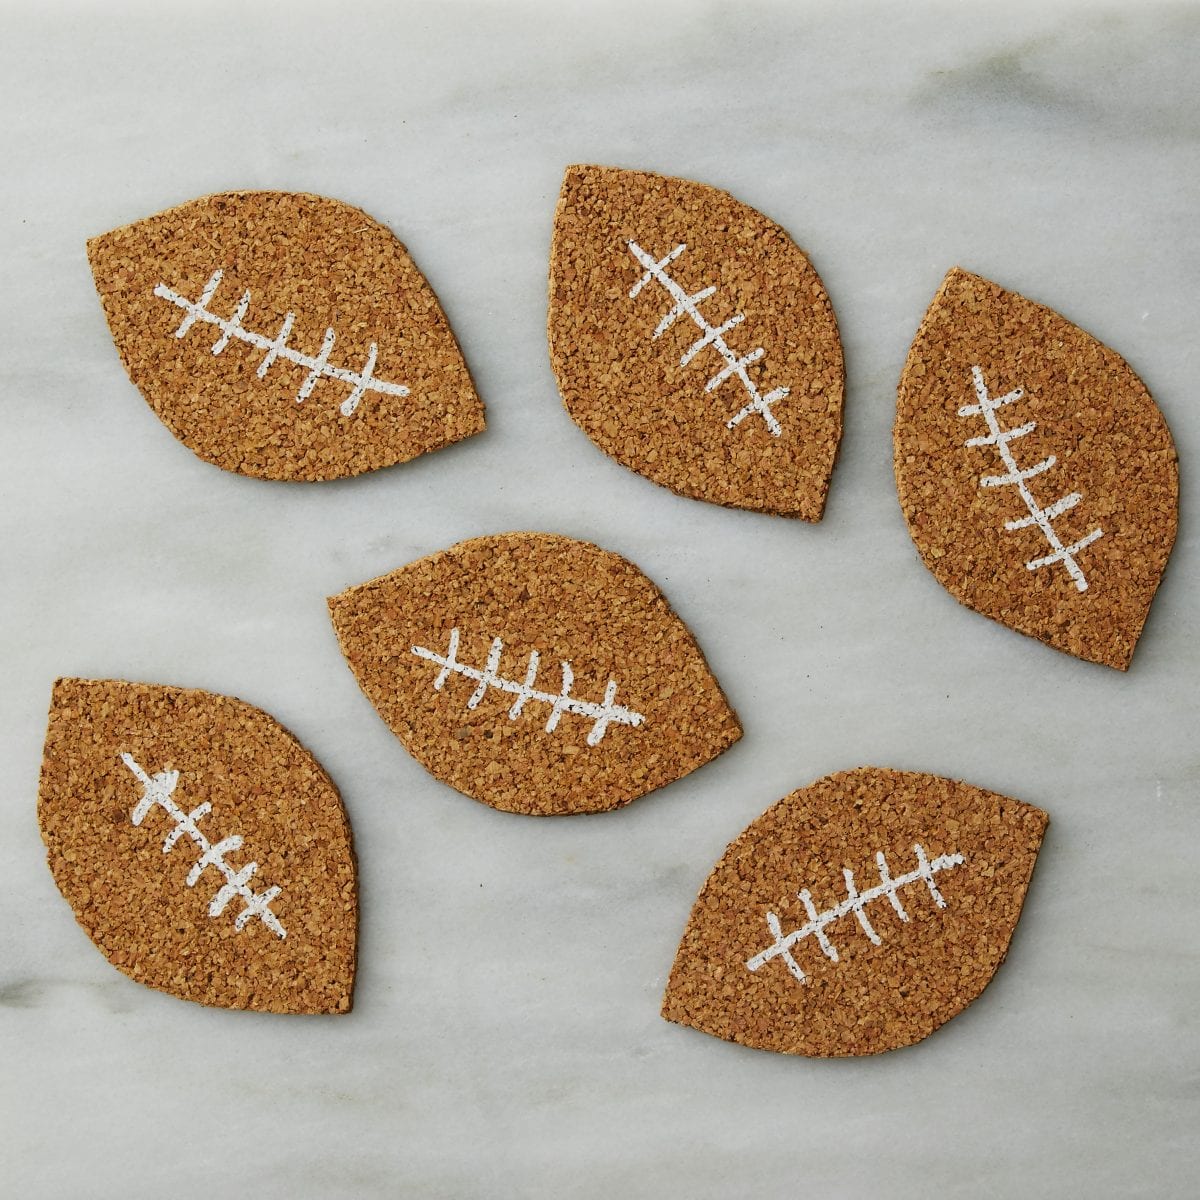 Darcy Miller Designs, Football Coasters, Super Bowl, cork, coaster, football, easy, game day, party, host, hostess, beer, easy craft, Darcy Miller, DIY